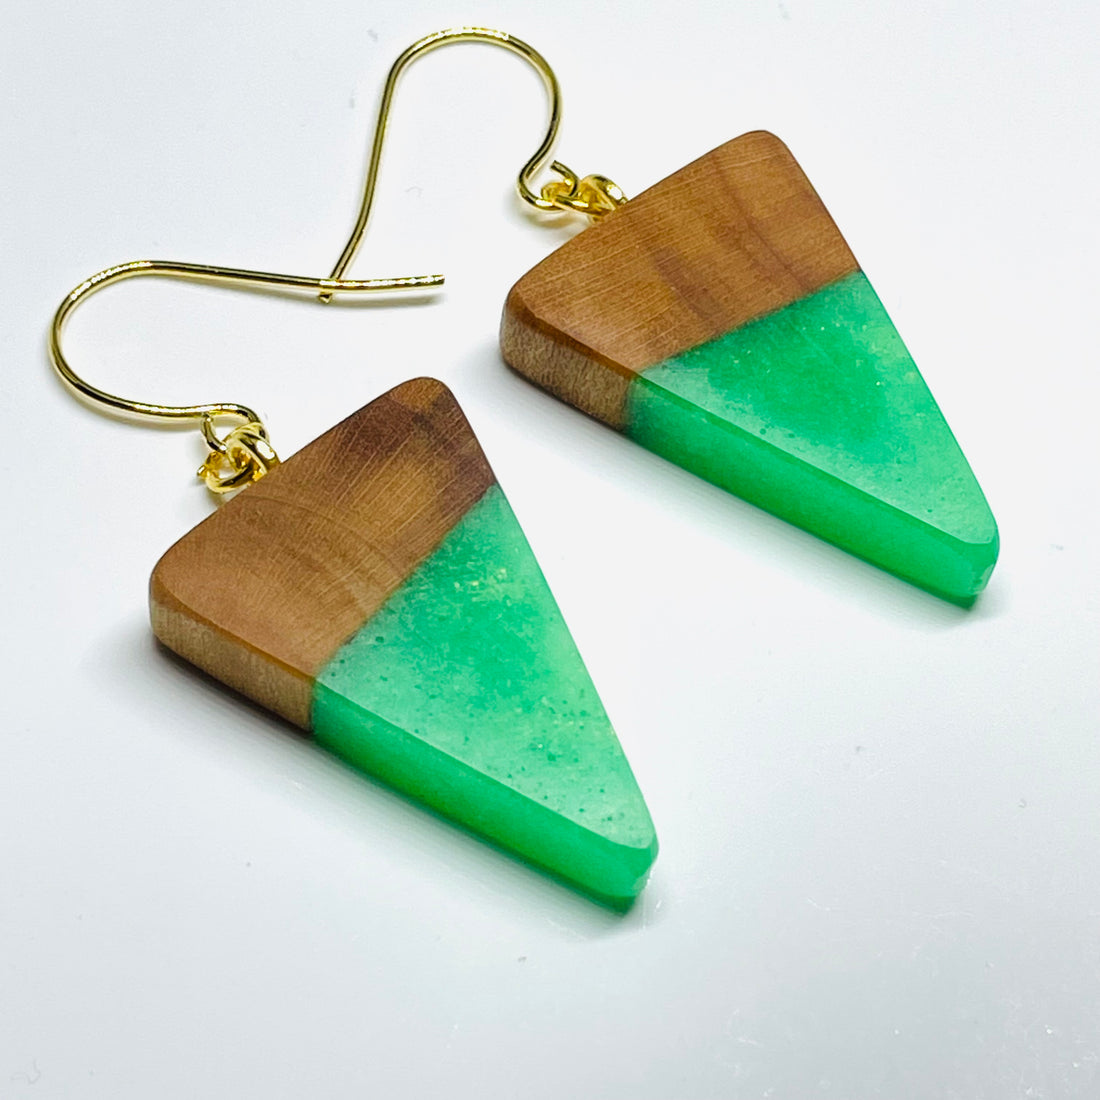 handmade jewelry, Minnesota local wood and resin artist. Green Glow-In-The-Dark resin with a maple wood, nickel free dangle earrings tiny isosceles shaped